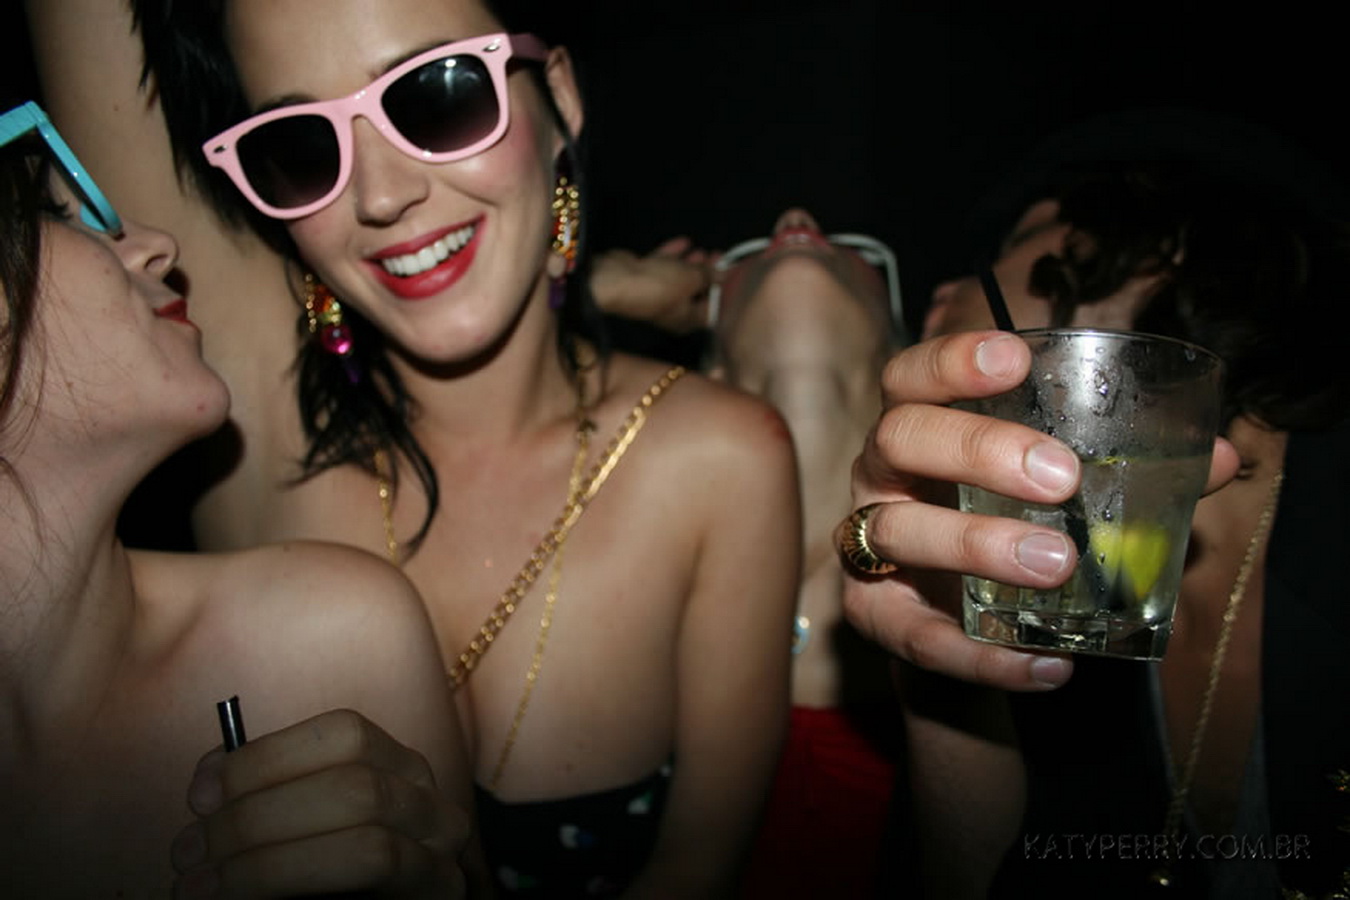 Katy_Perry_bobsslip_drunk_cleavage_downblouse_upskirt_nipslip_at_her_birthday_2007_party_99x_HQ_11.jpg